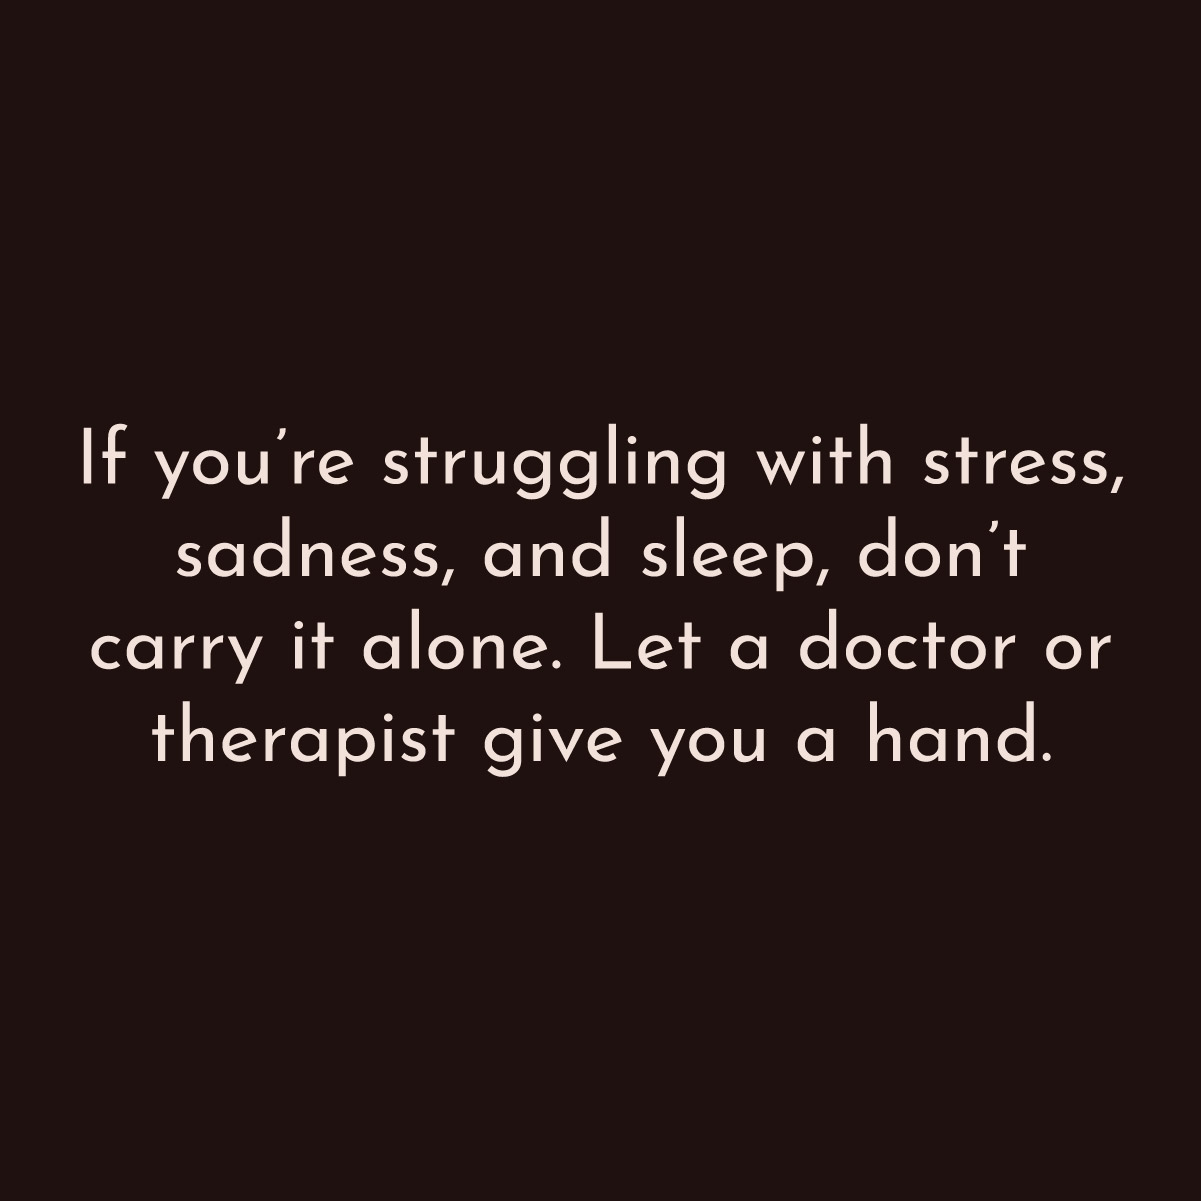 If you're struggling with stress, sadness and sleep, don't carry it alone. Let a doctor or therapist give you a hand.